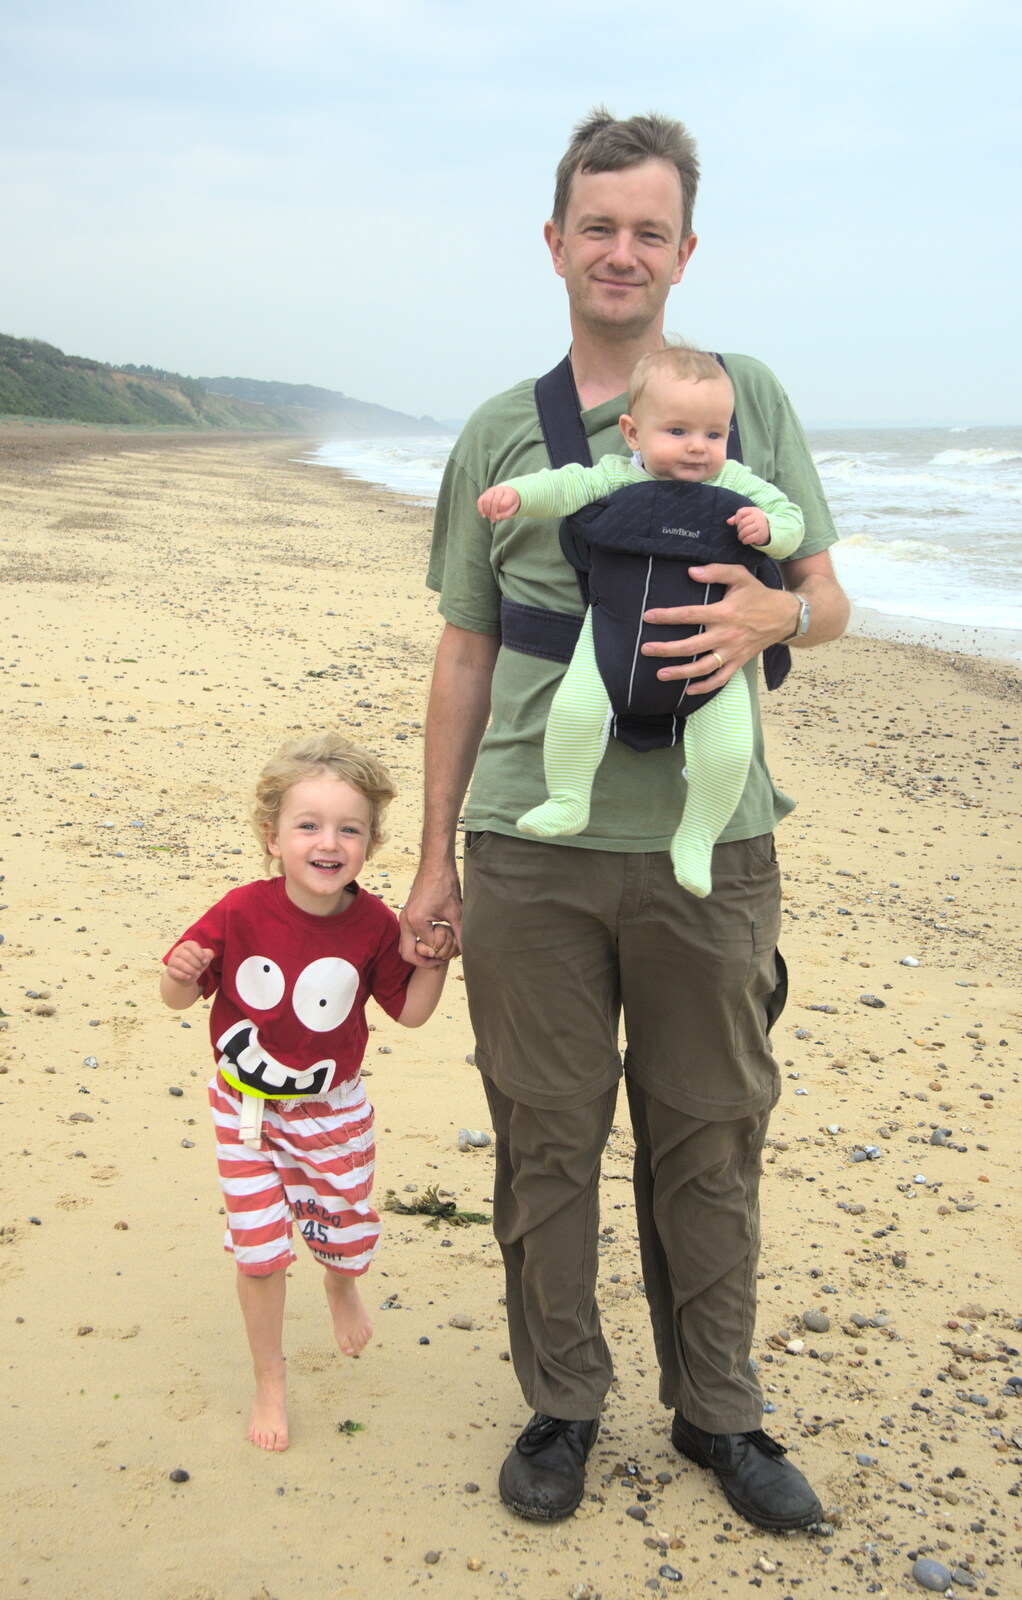 The boys: Fred, Nosher and Harry from Camping by the Seaside, Cliff House, Dunwich, Suffolk - 15th August 2012